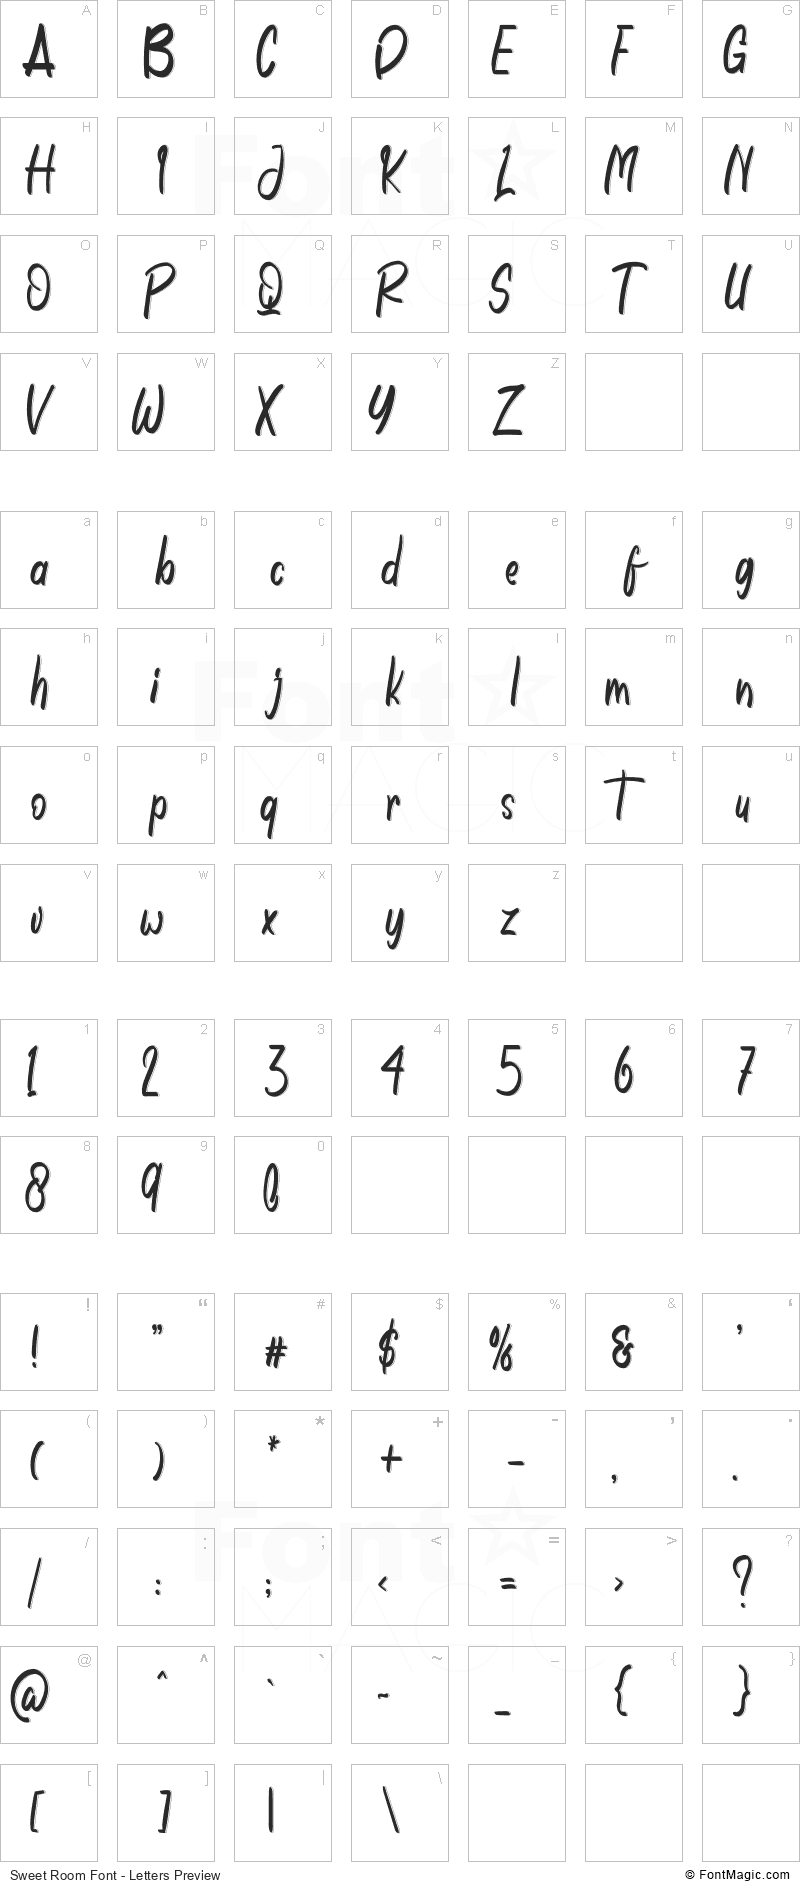 Sweet Room Font - All Latters Preview Chart